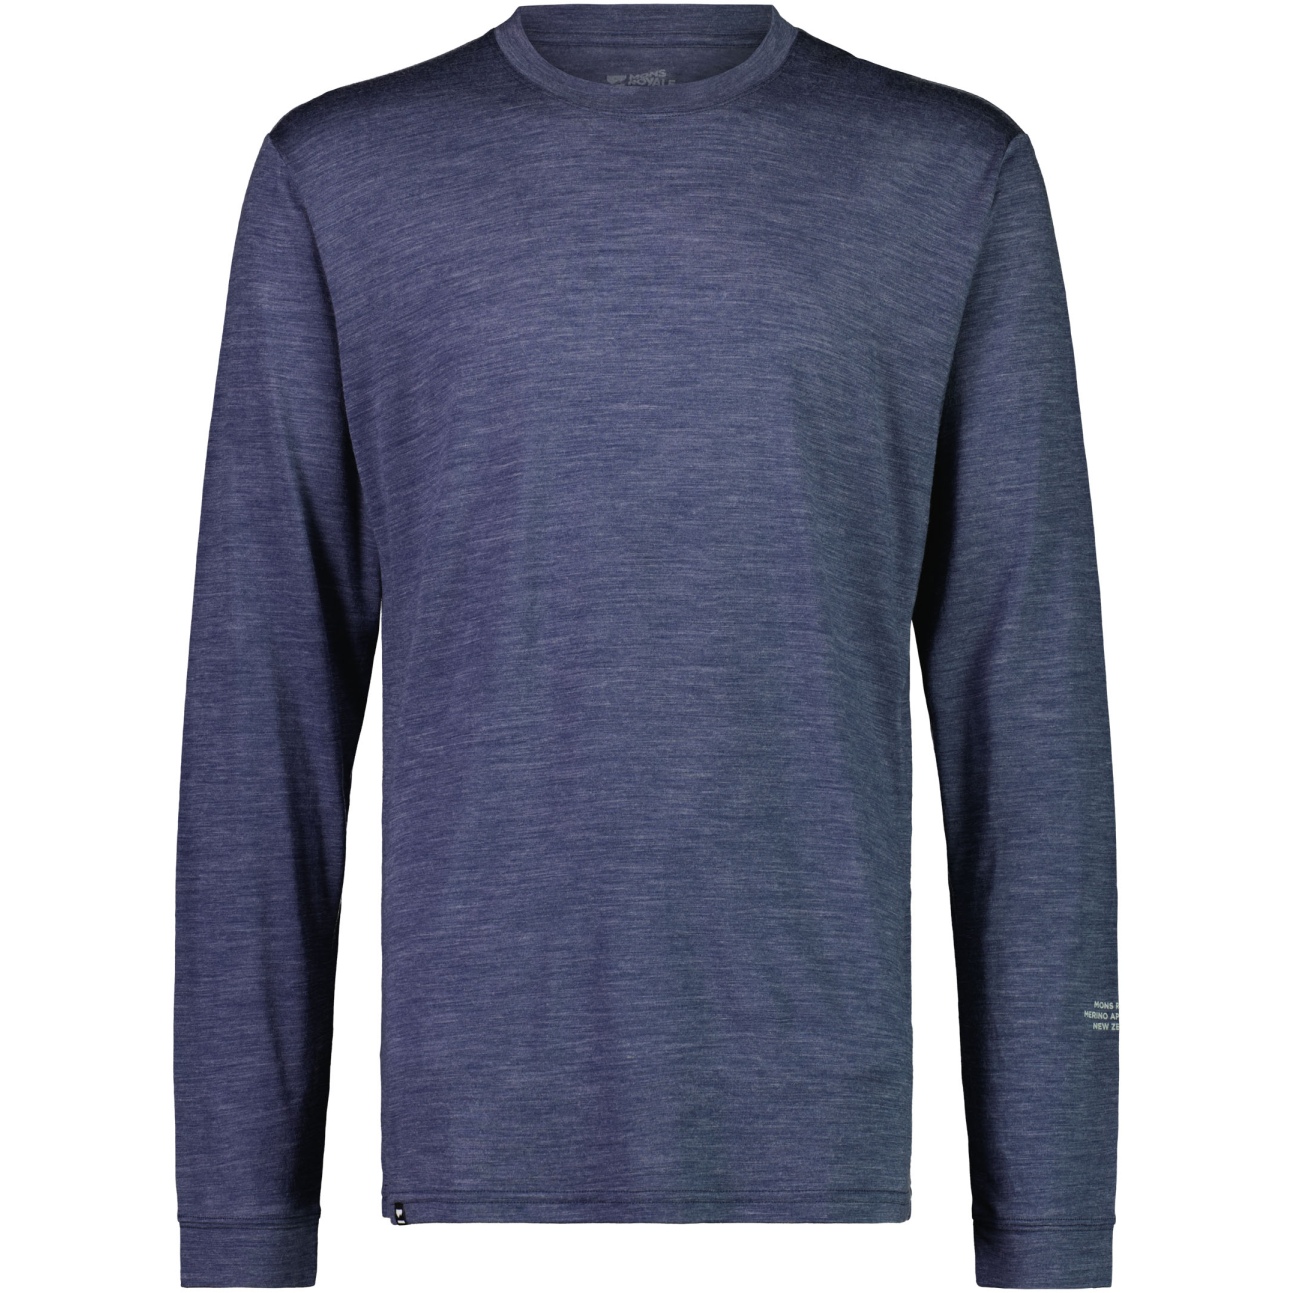 Picture of Mons Royale Zephyr Merino Cool Long Sleeve Men - midnight